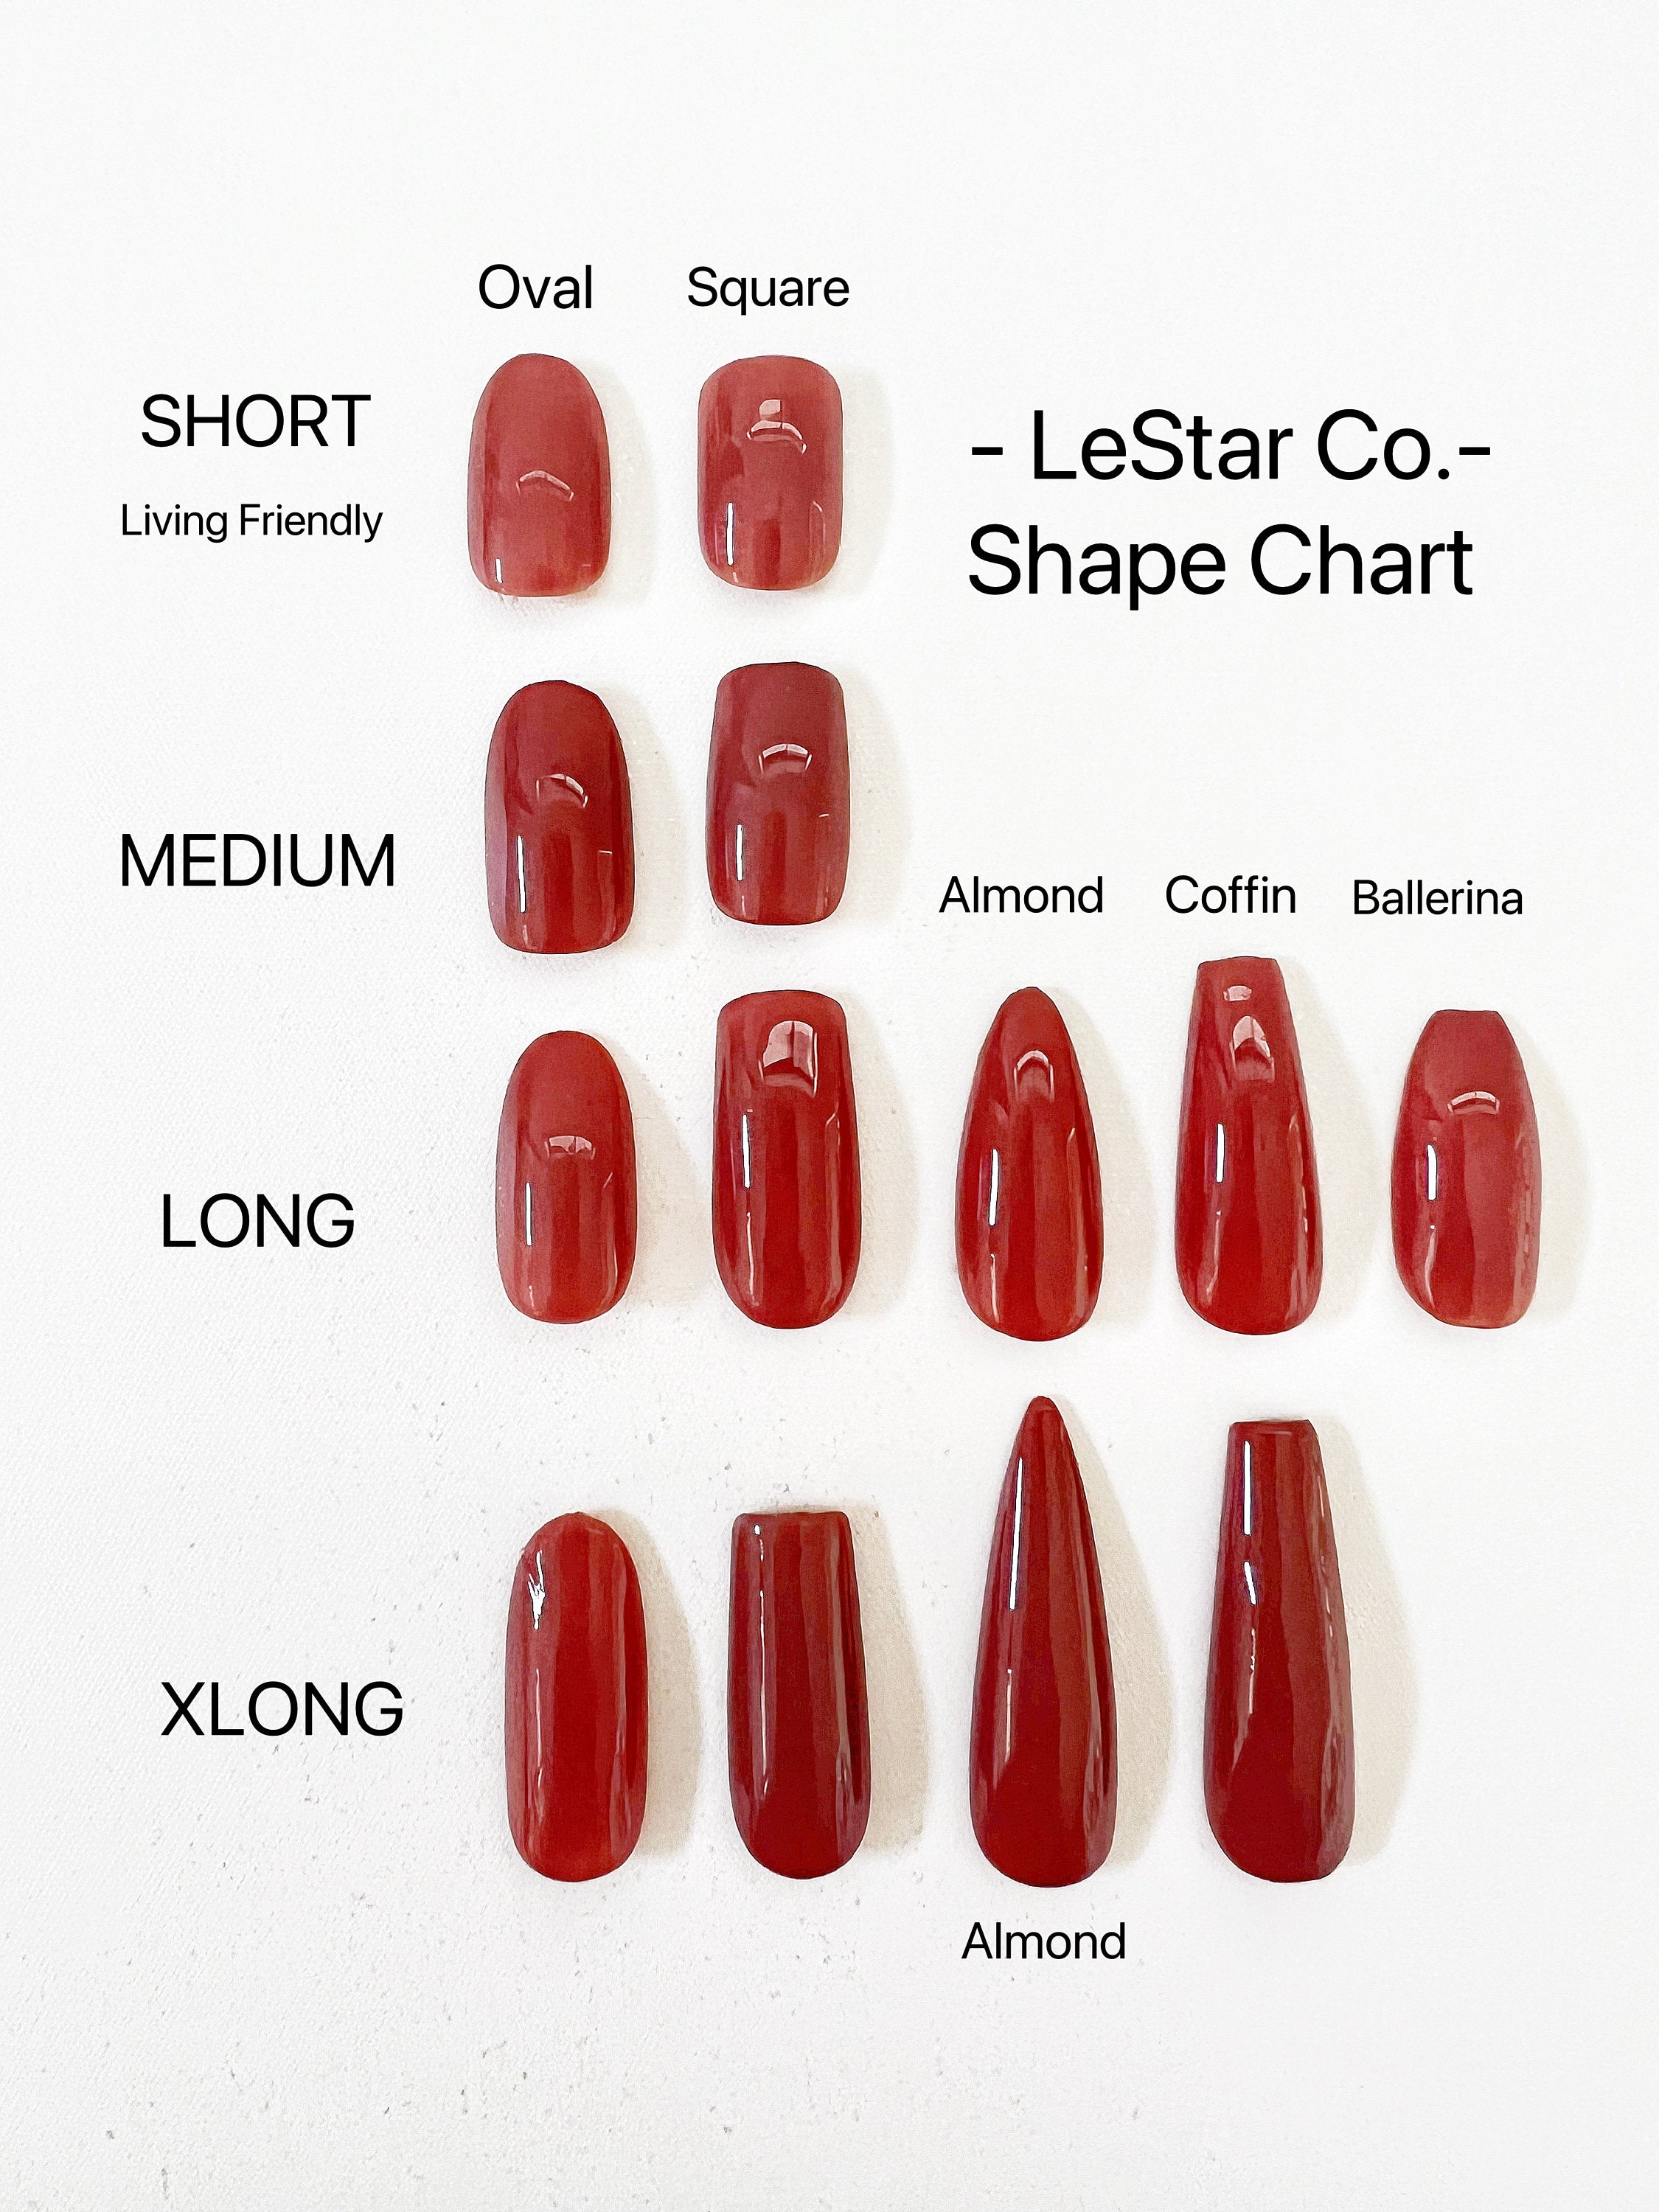 Professional nail styling products | NOX shop